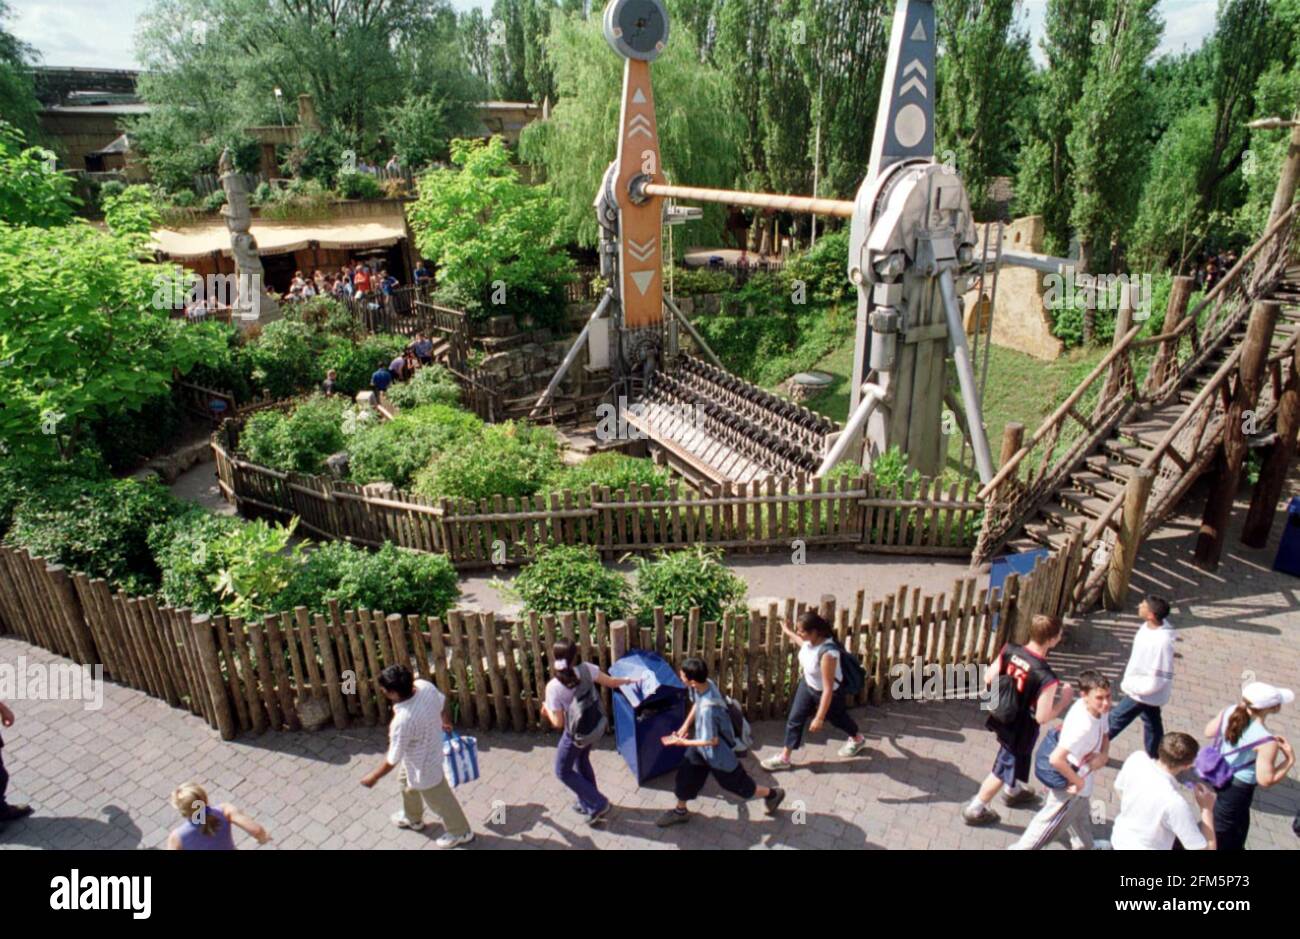 THE RAMESES REVENGE RIDE AT CHESSINGTON WORLD OF ADVENTURES FAILED TODAY, LEAVING PASSENGERS STRANDED, BEFORE BEING RESCUED.  PIC SHOWS THE RIDE AFTER THE INCIDENT. Stock Photo